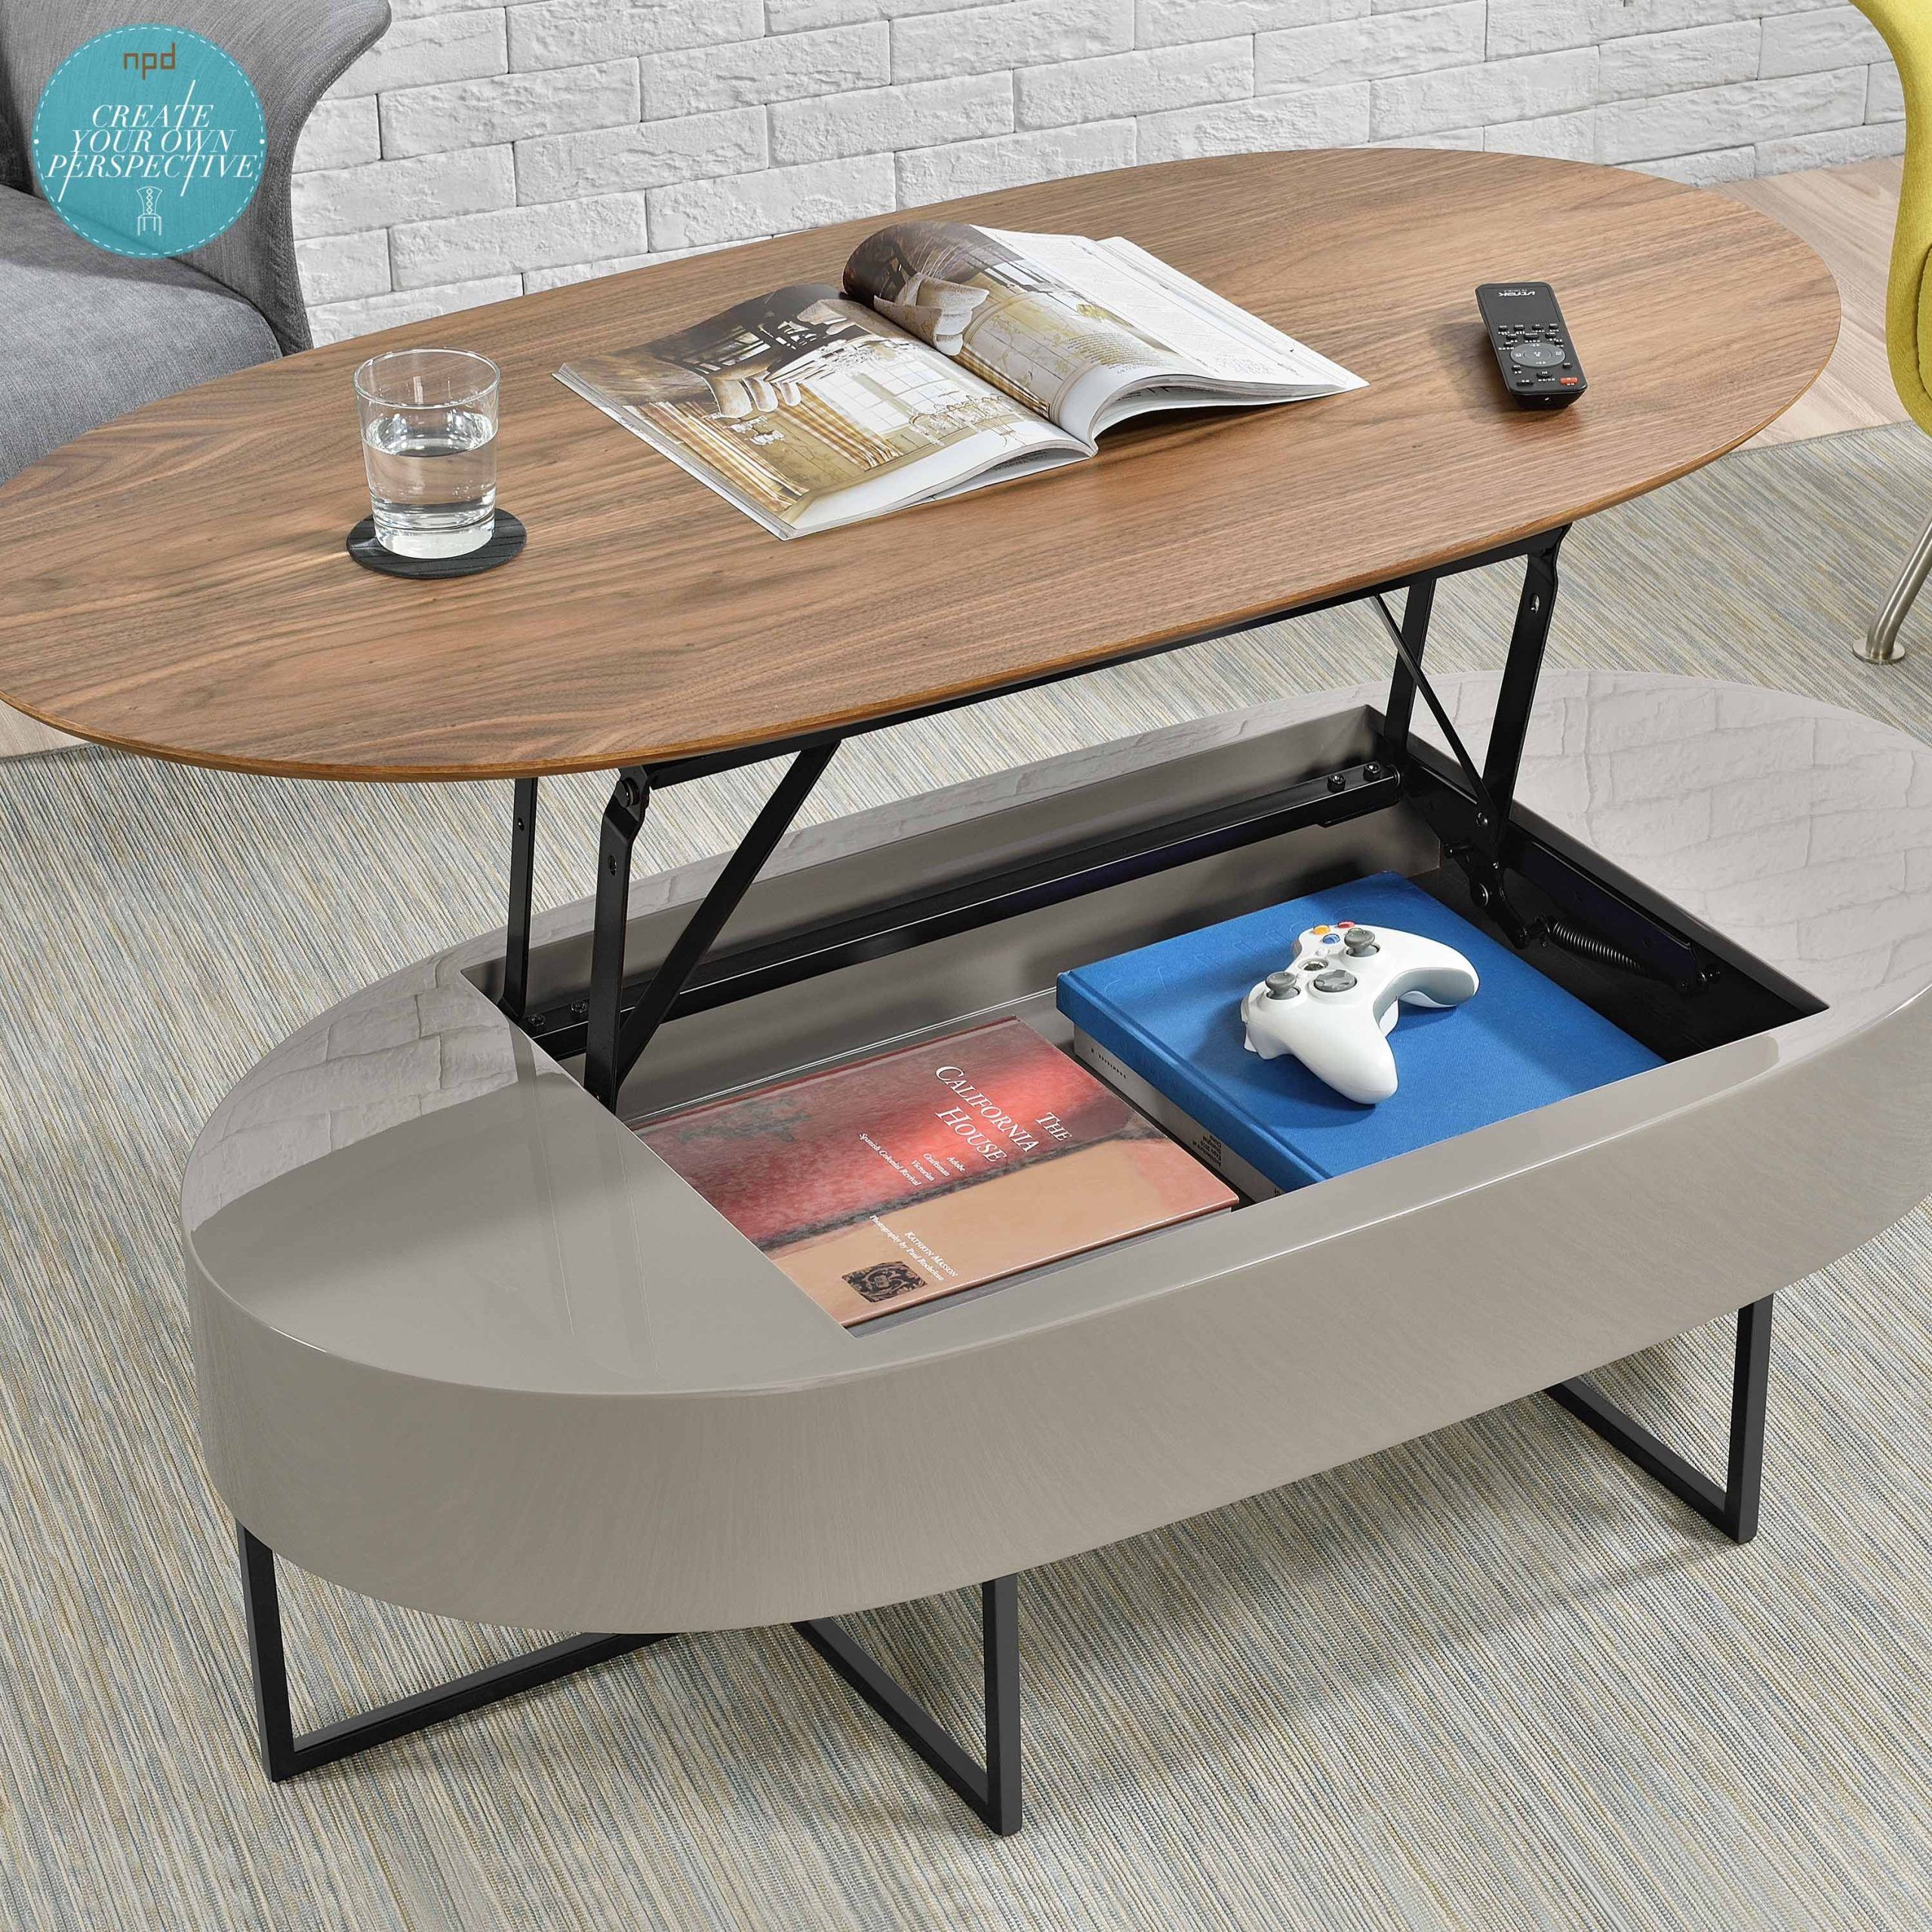 The Benefits Of Lifting Coffee Tables – Coffee Table Decor With Lift Top Coffee Tables With Shelves (View 18 of 20)